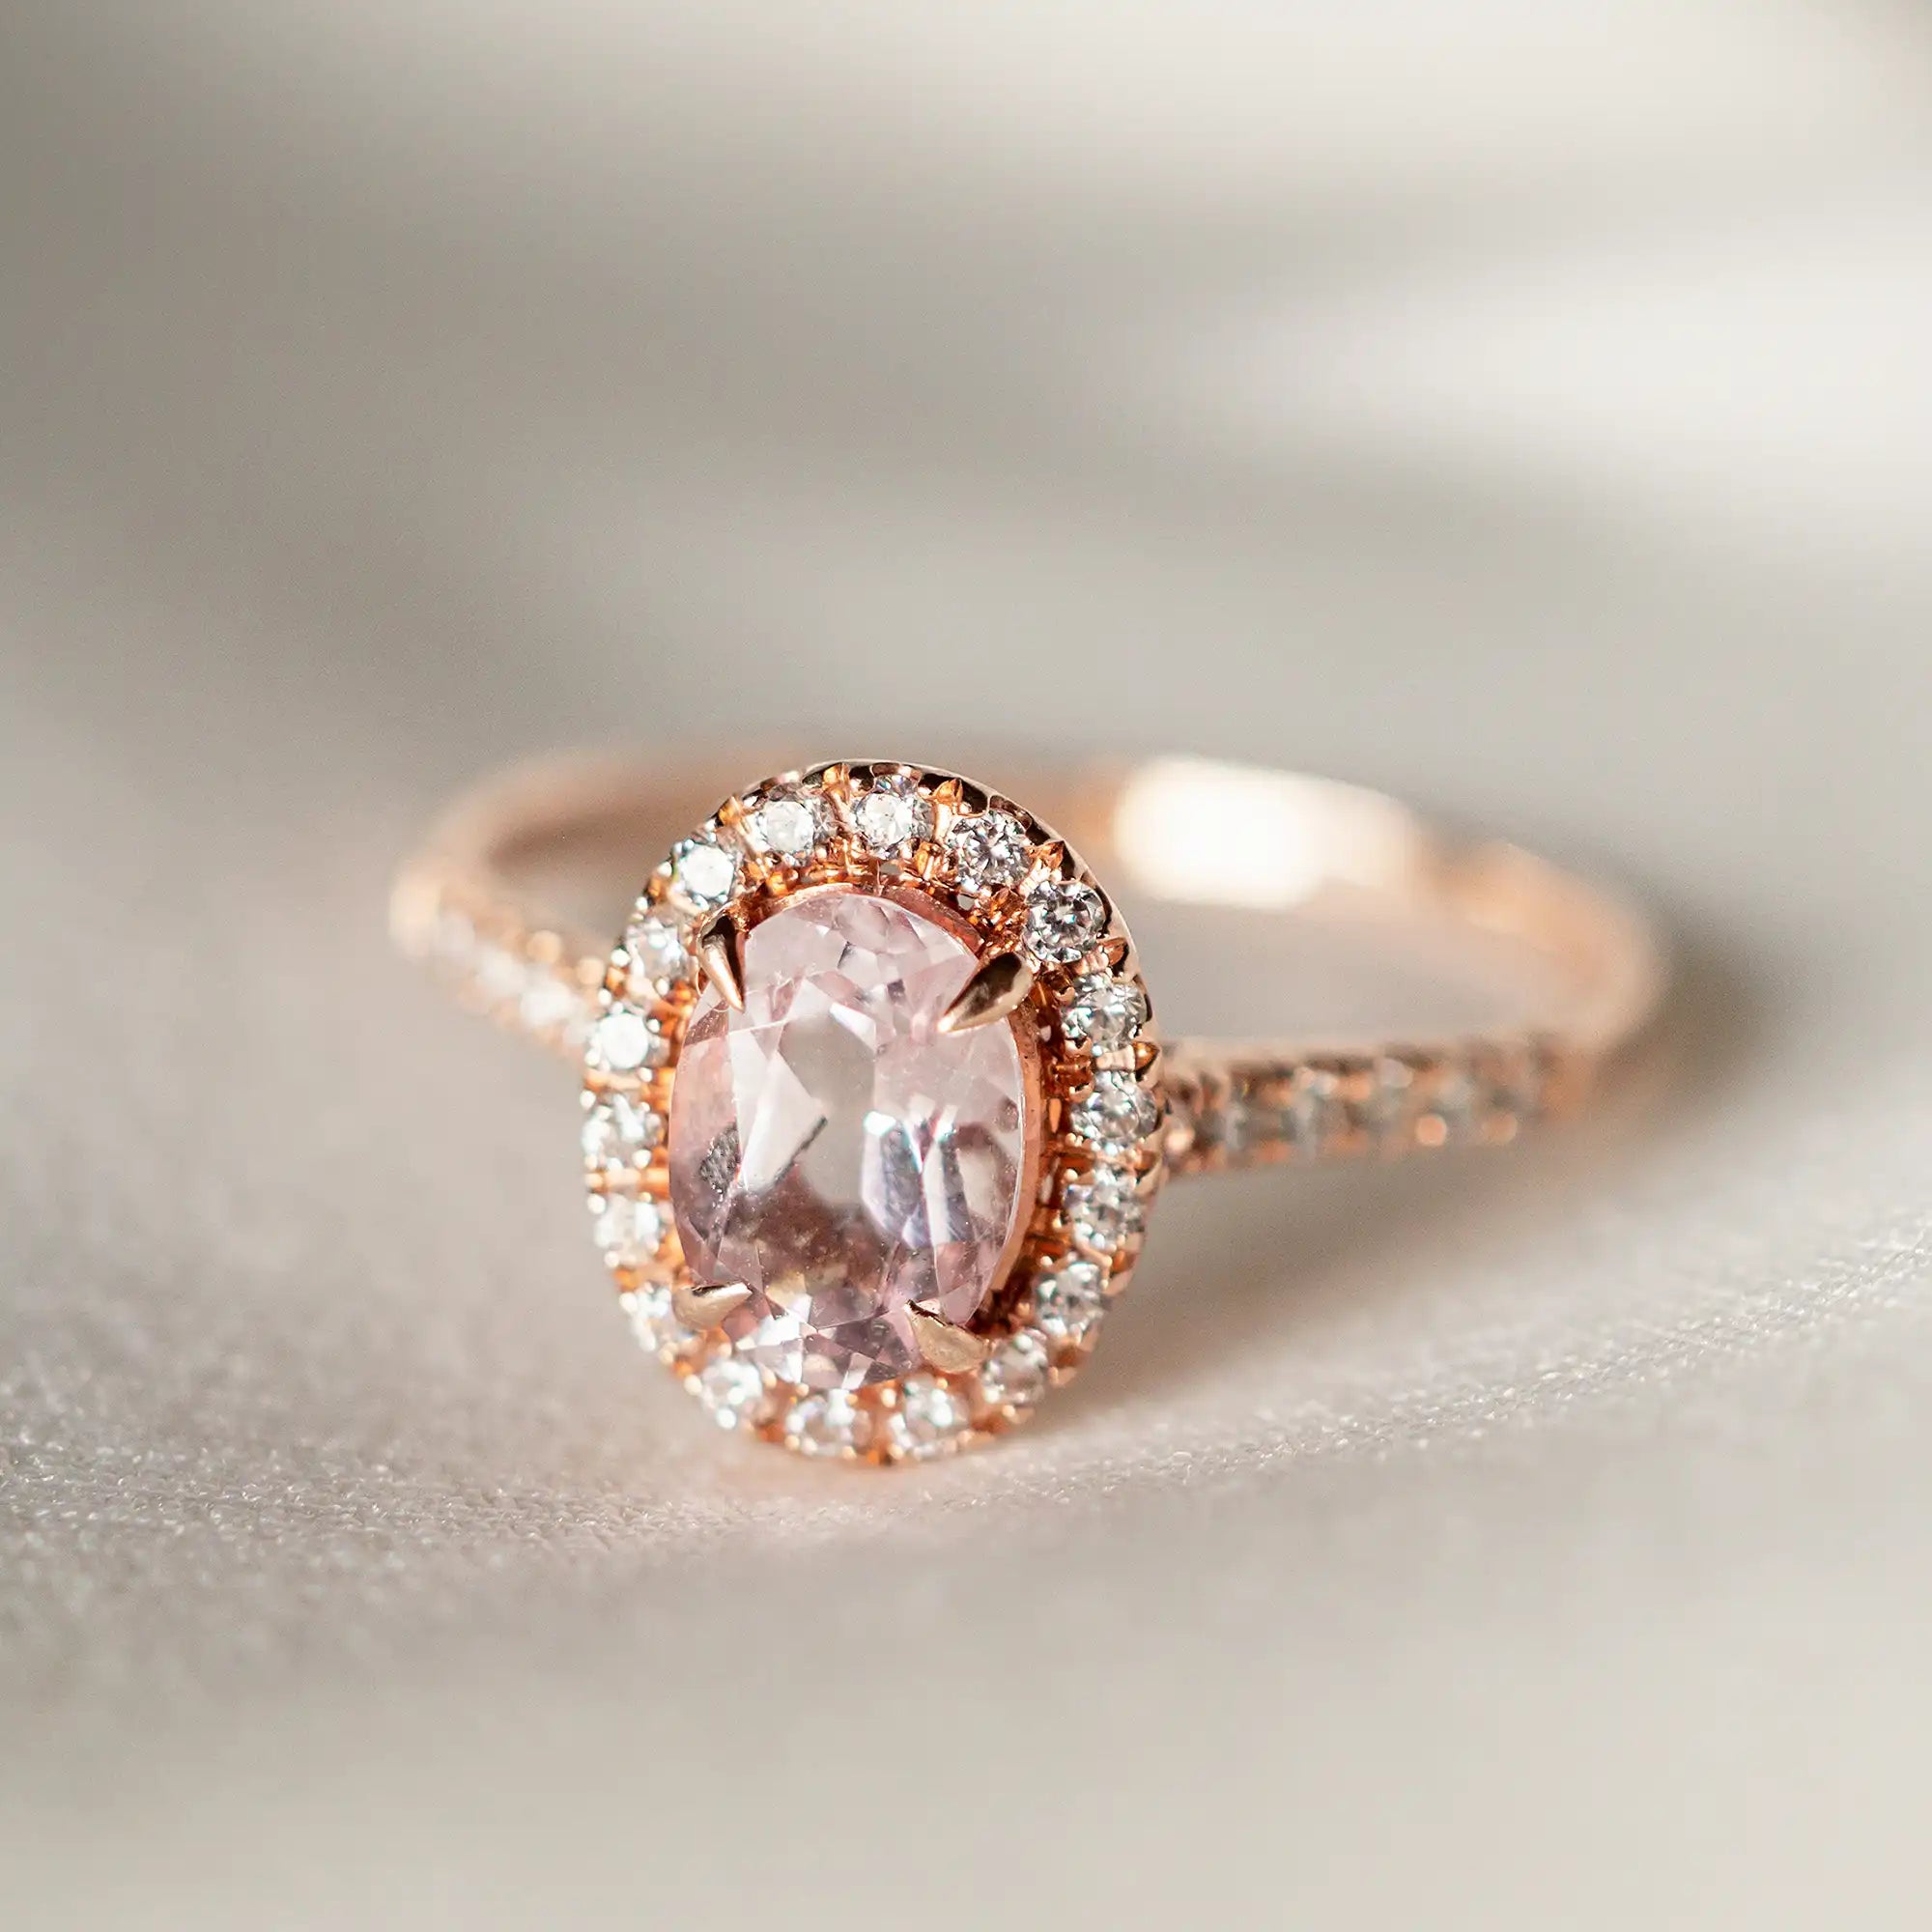 Oval shaped chocolate diamond ring in rose gold for her